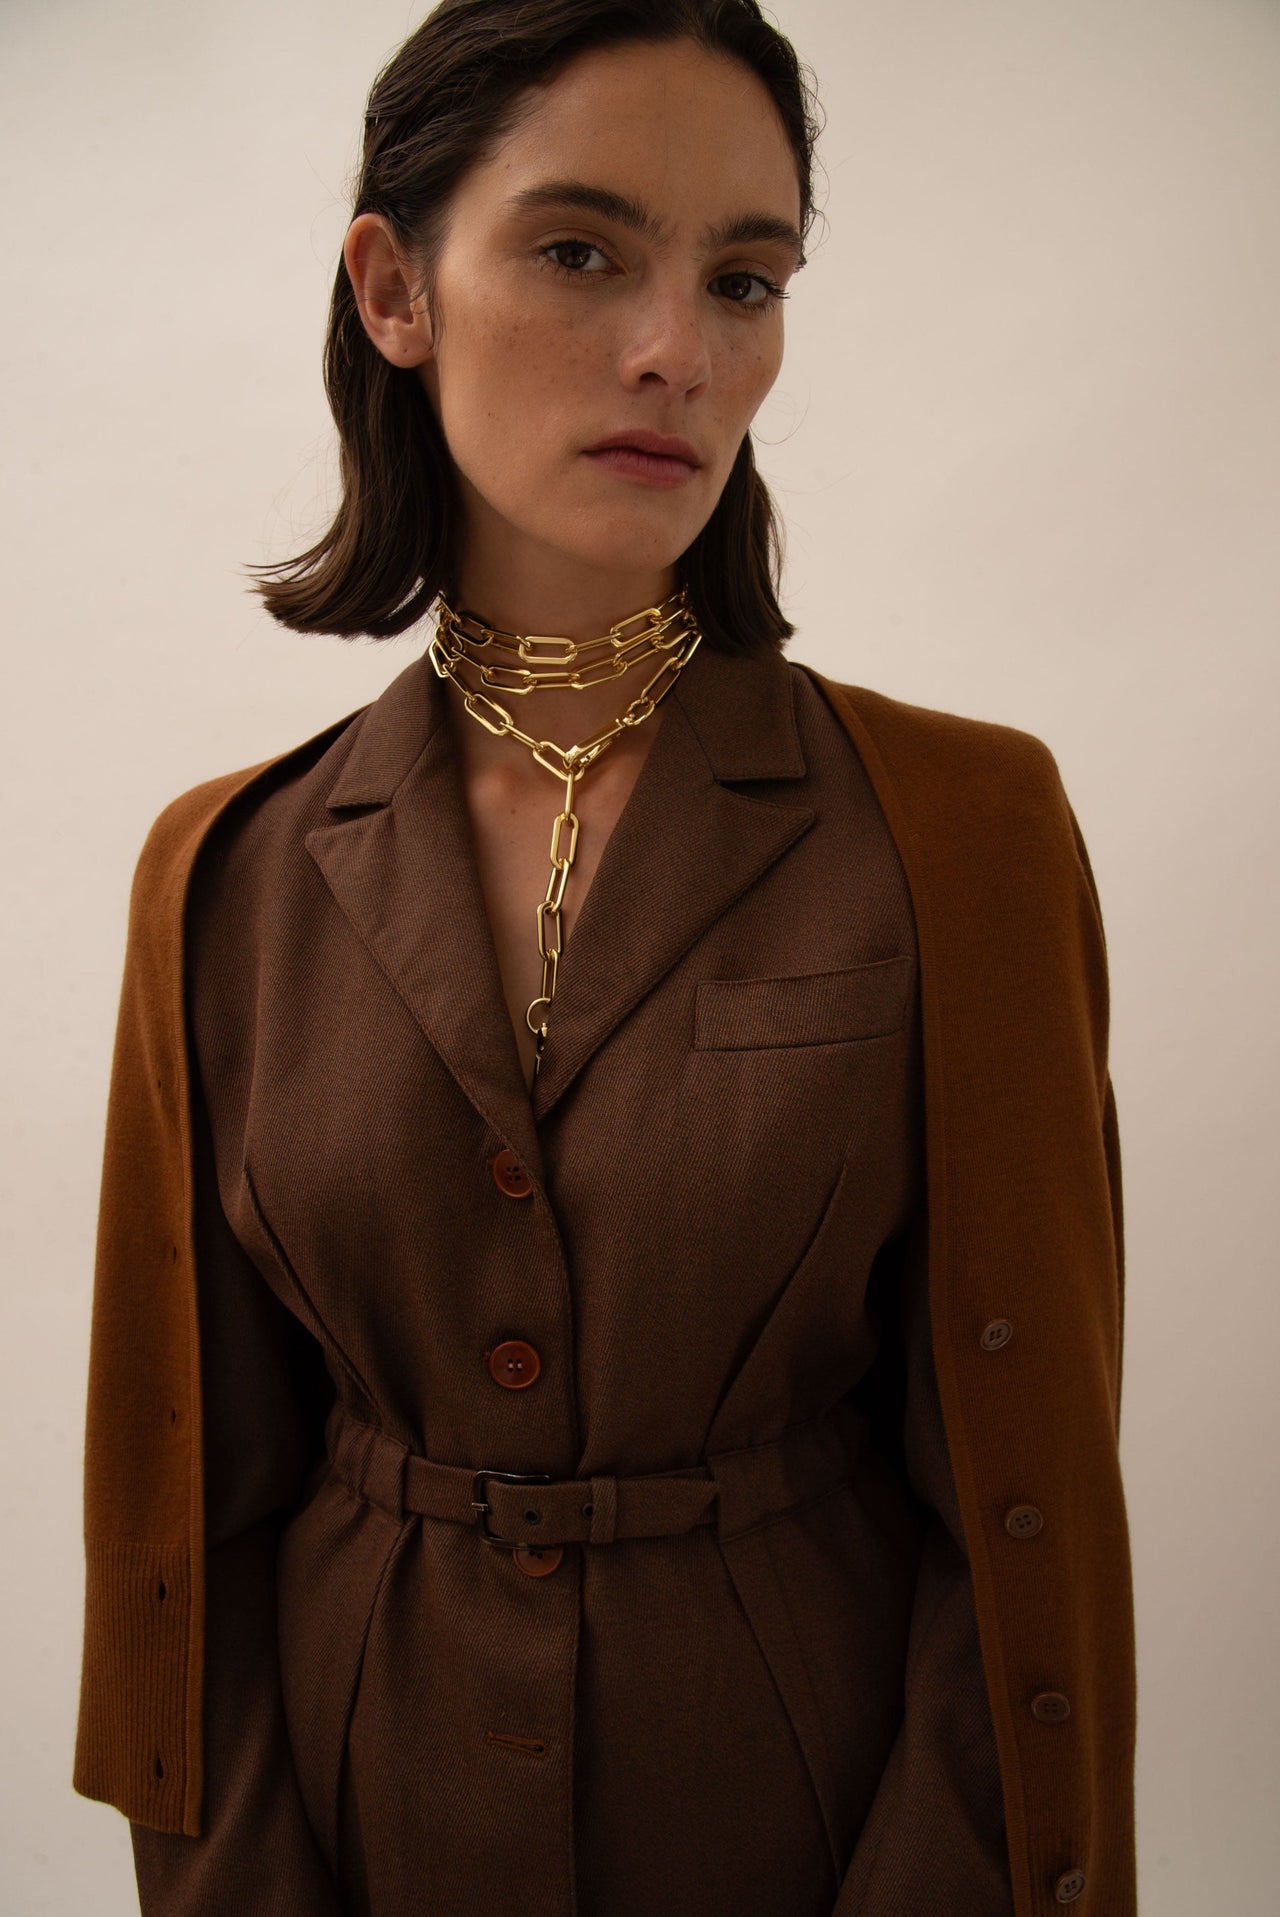 The LAYERED CHAIN NECKLACE Gold - JULIA SKERGETH